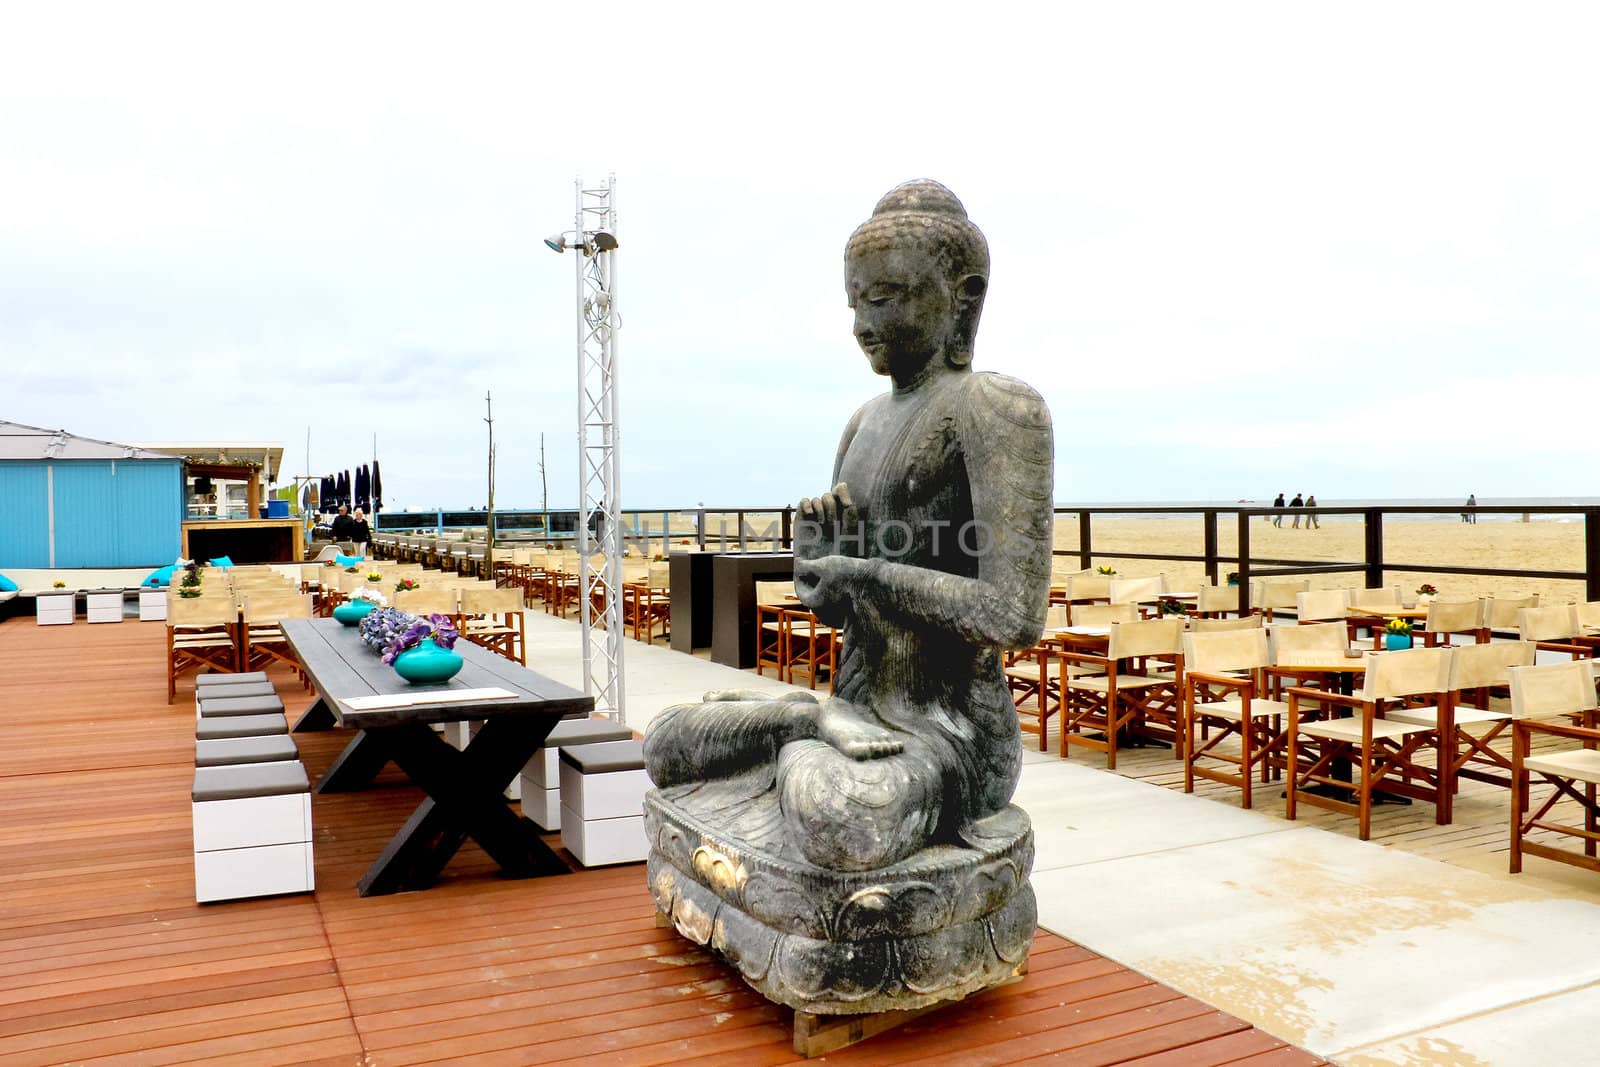 Spring on the coast. The statue in the outdoor cafe at The Hague by NickNick